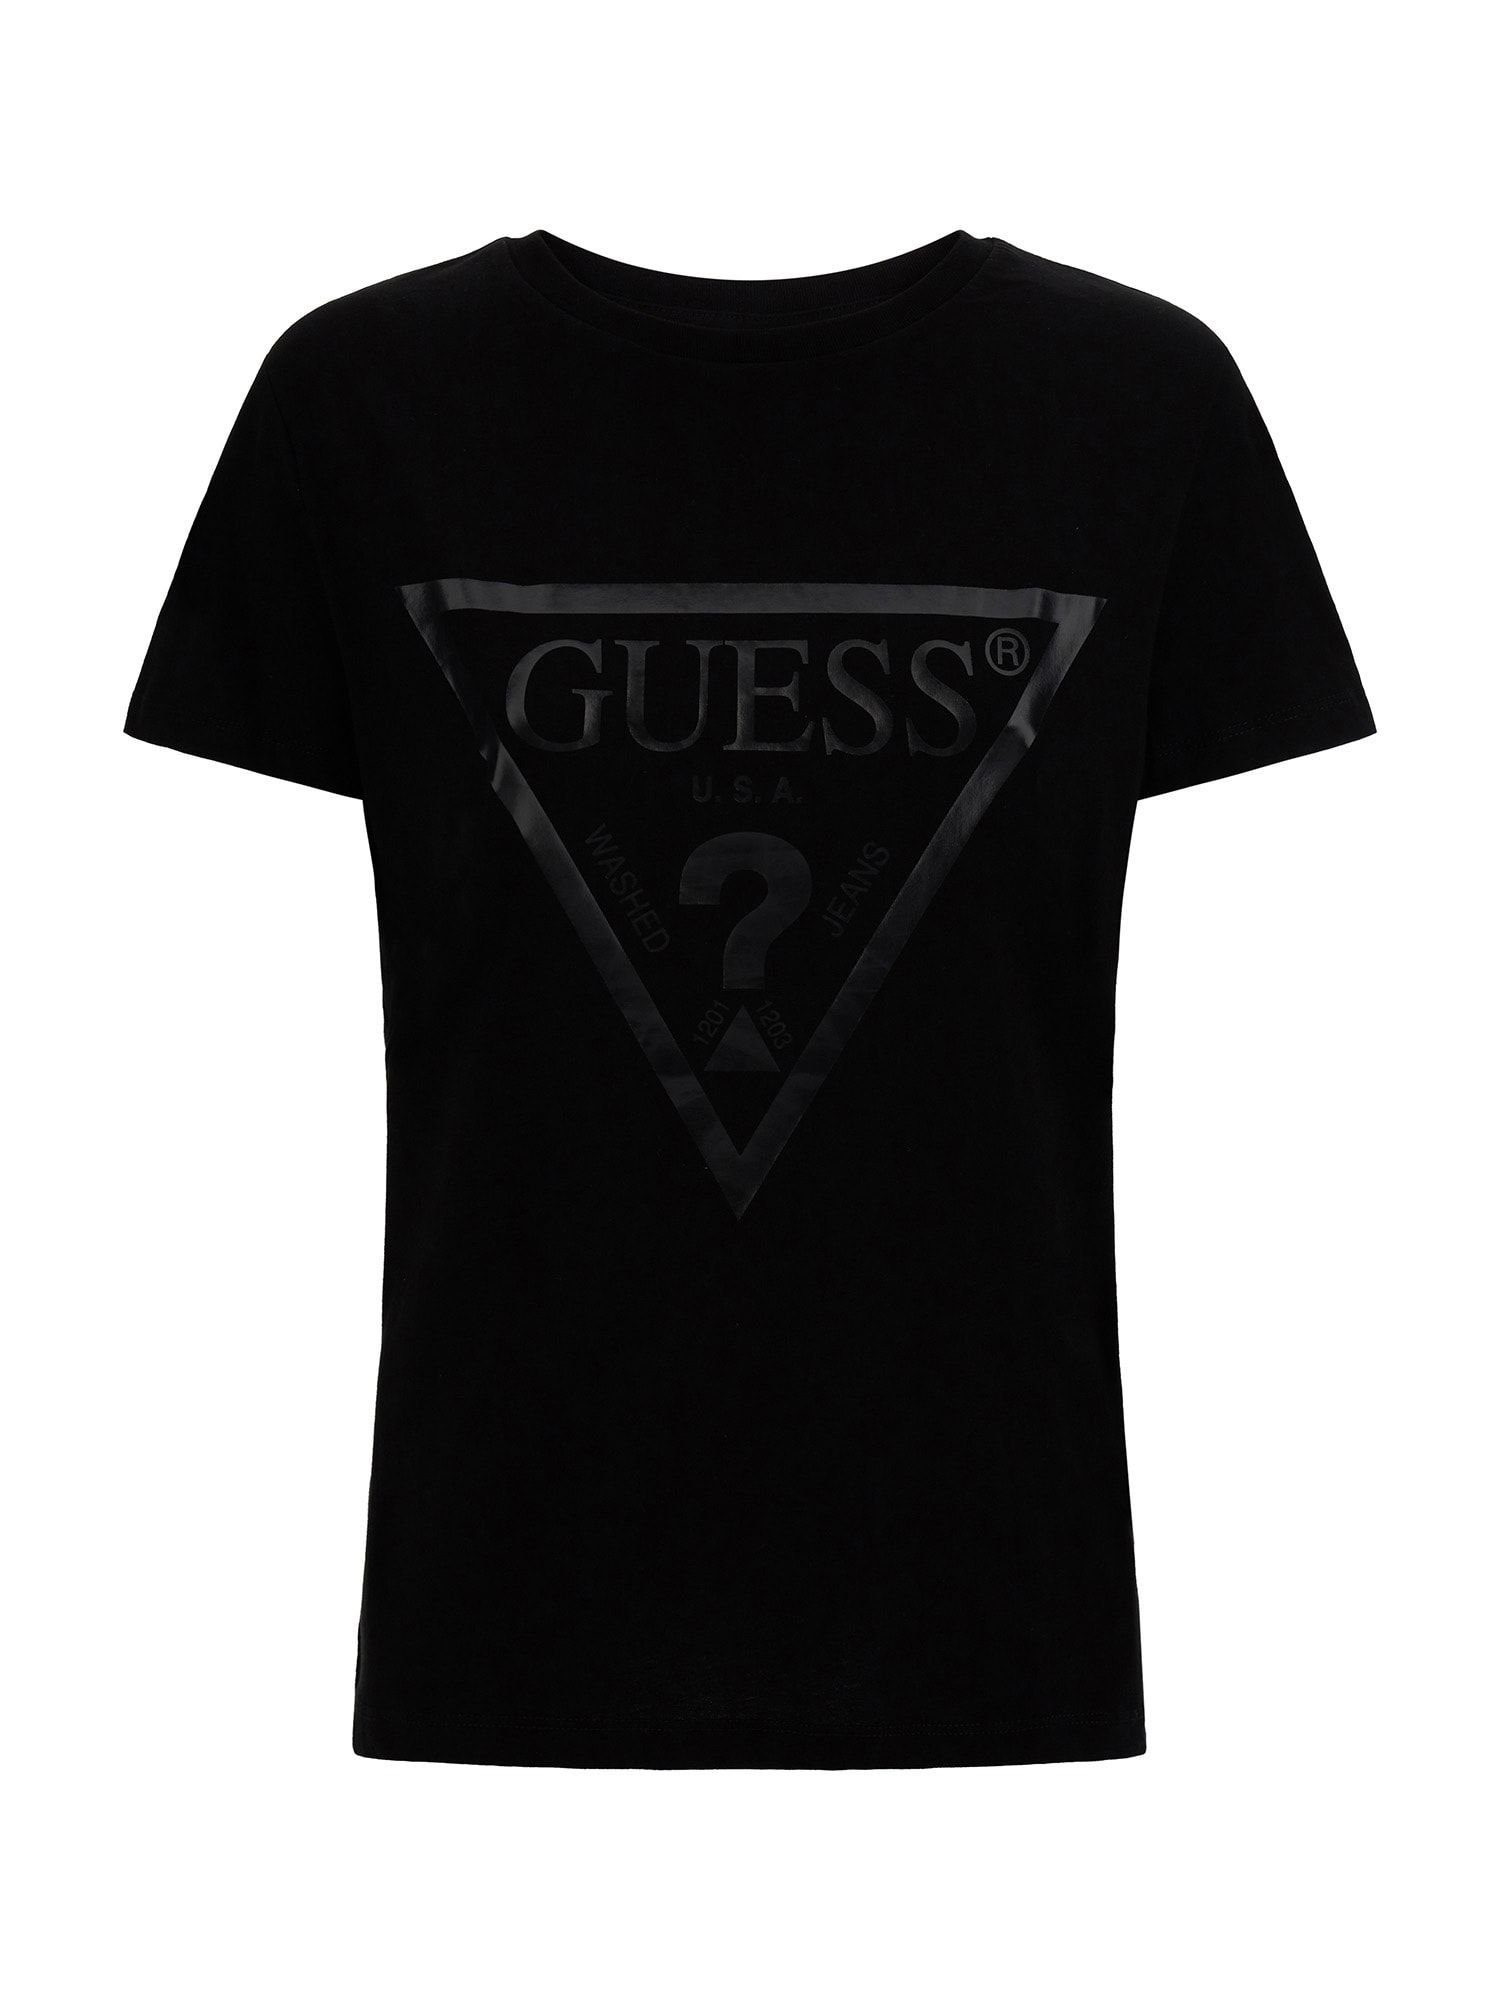 A996 T-Shirt Collection Guess Jet Black